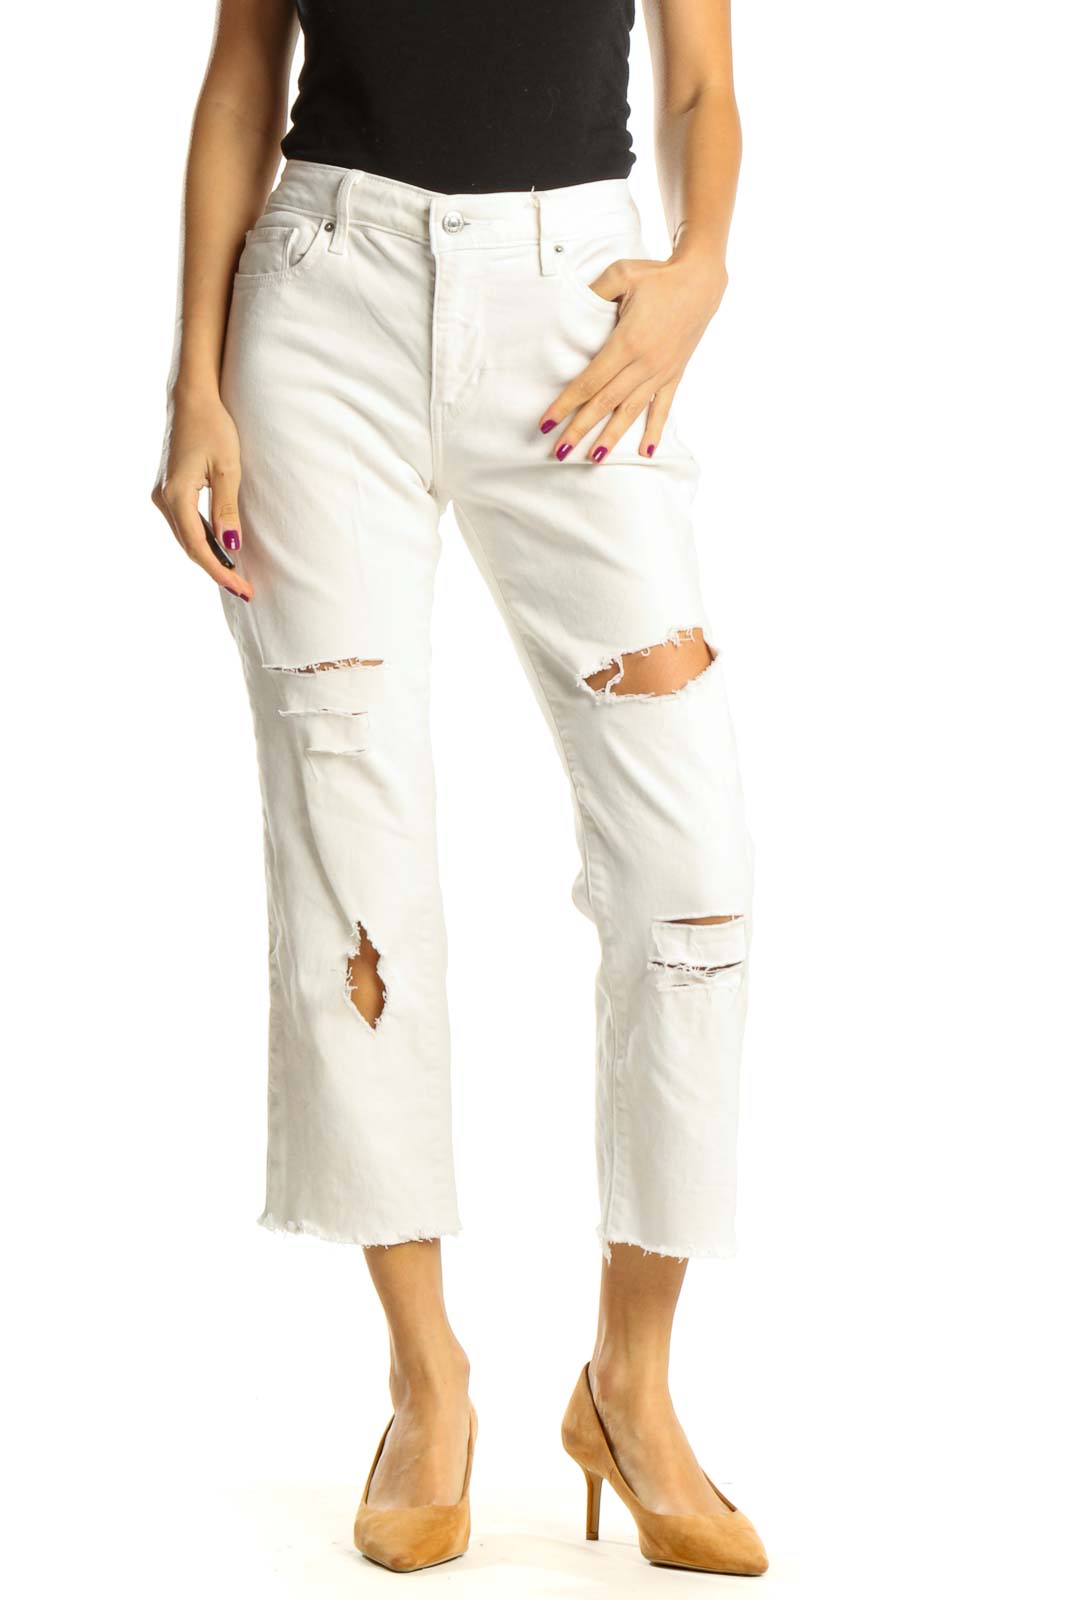 Reworked White High Waisted Cropped Distressed Flare Jeans Front